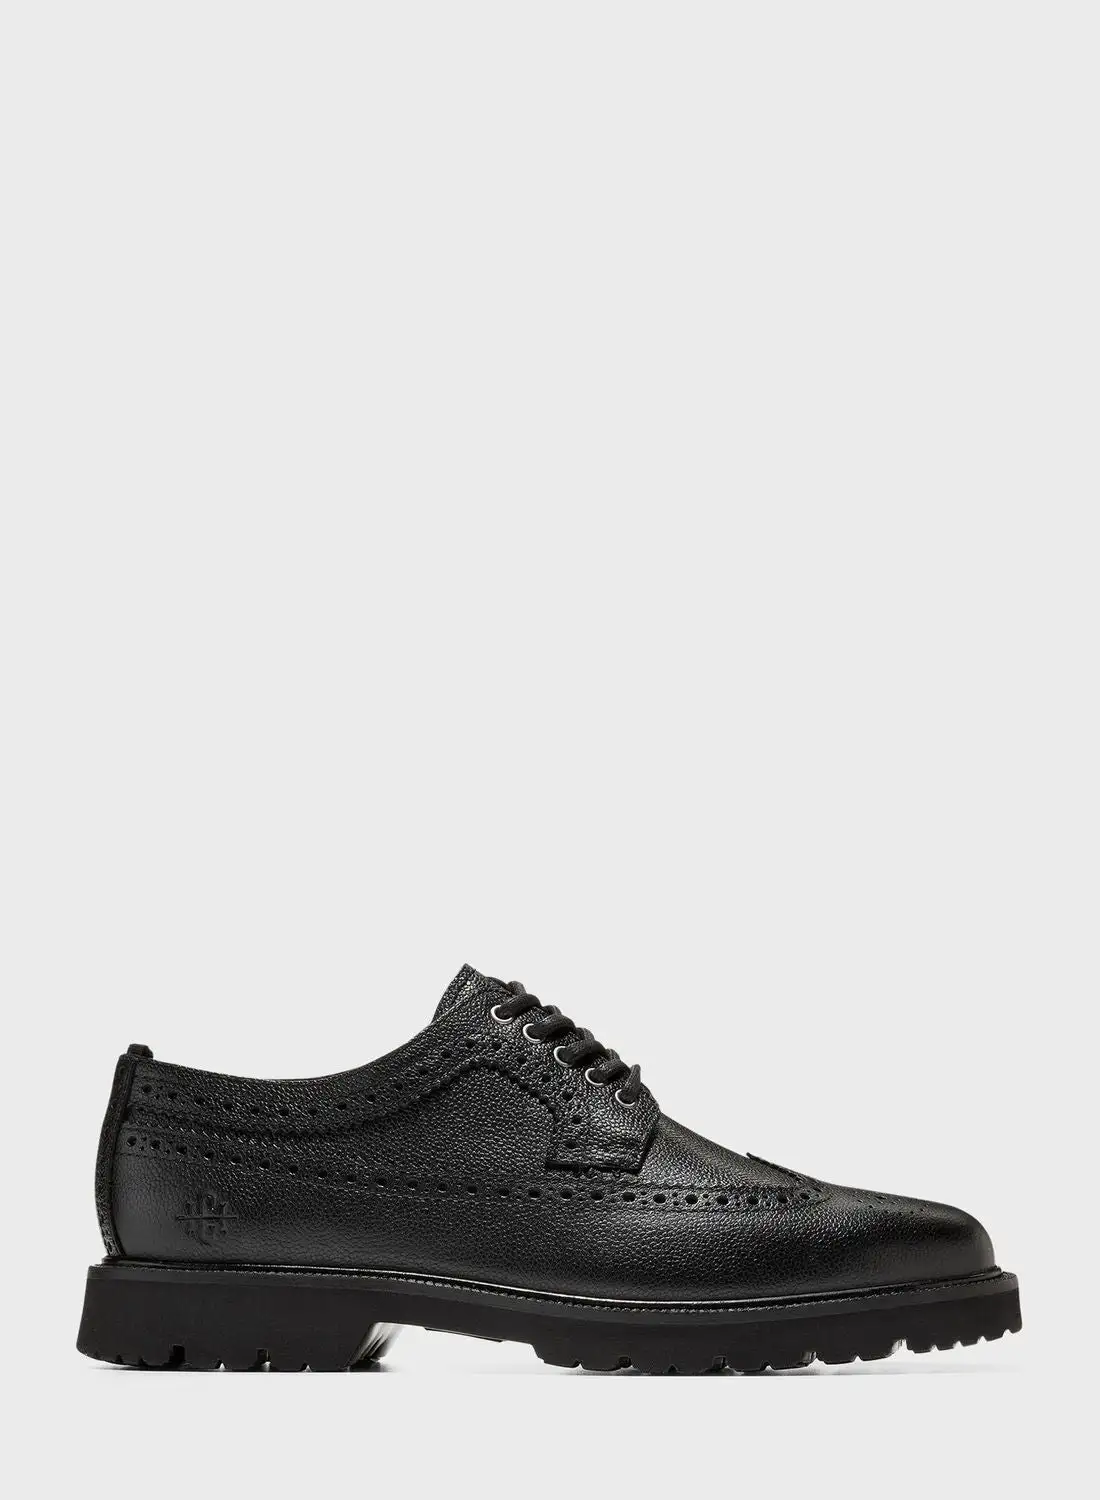 COLE HAAN Formal Lace Ups